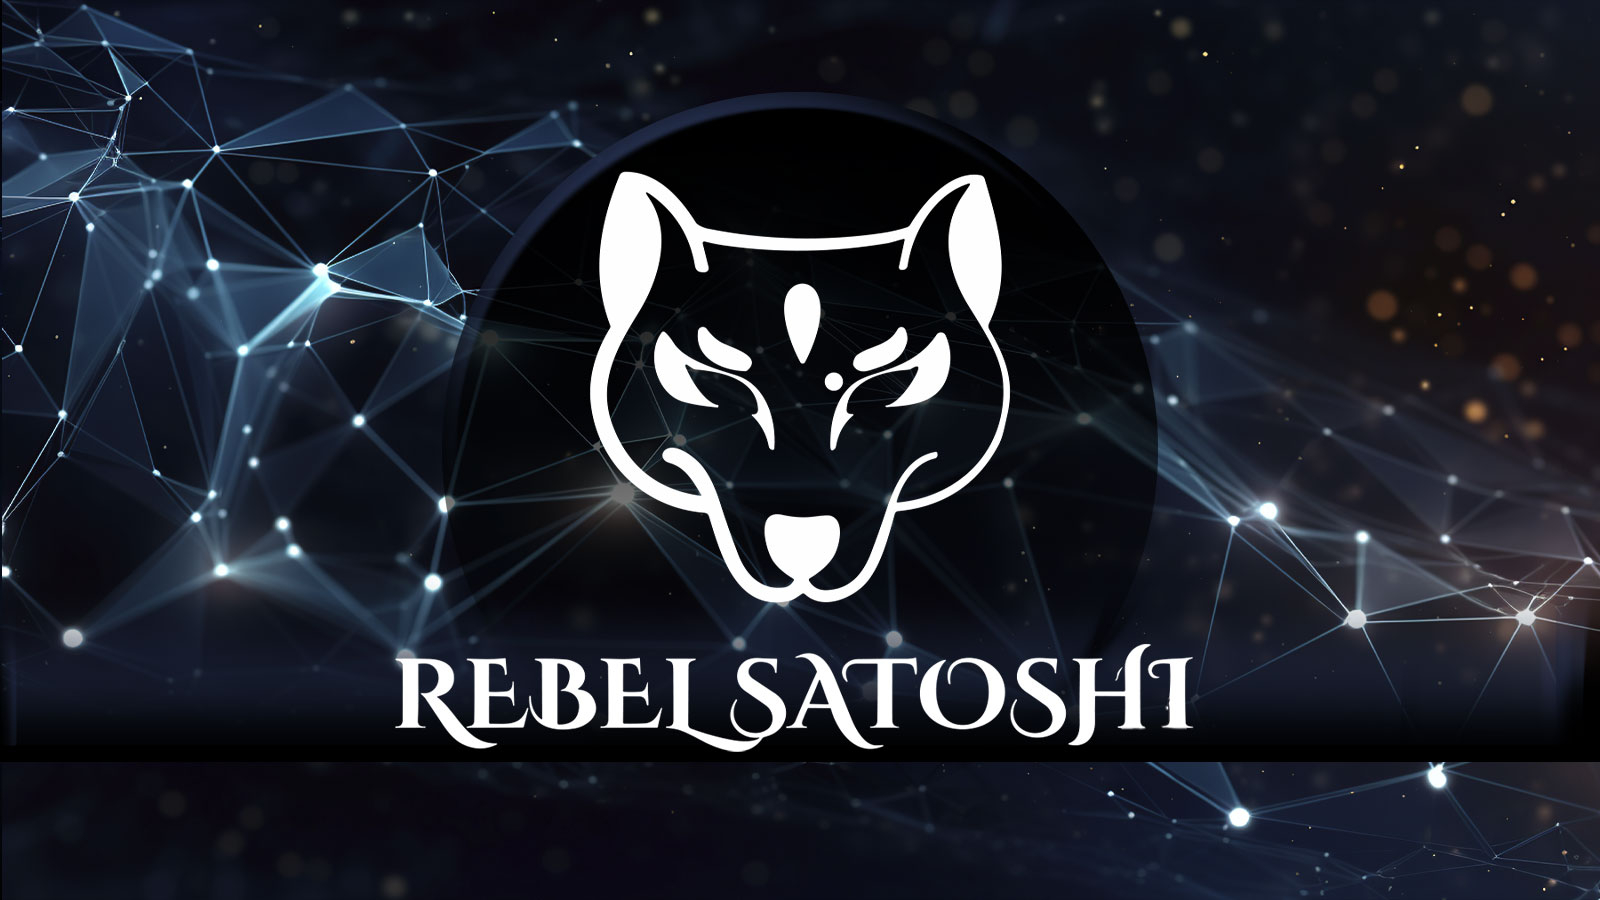 Rebel Satoshi (RBLZ) Token Pre-Sale Amidst Investors Spotlights in March while Ethereum (ETH) Conquered Key $3,550 Level